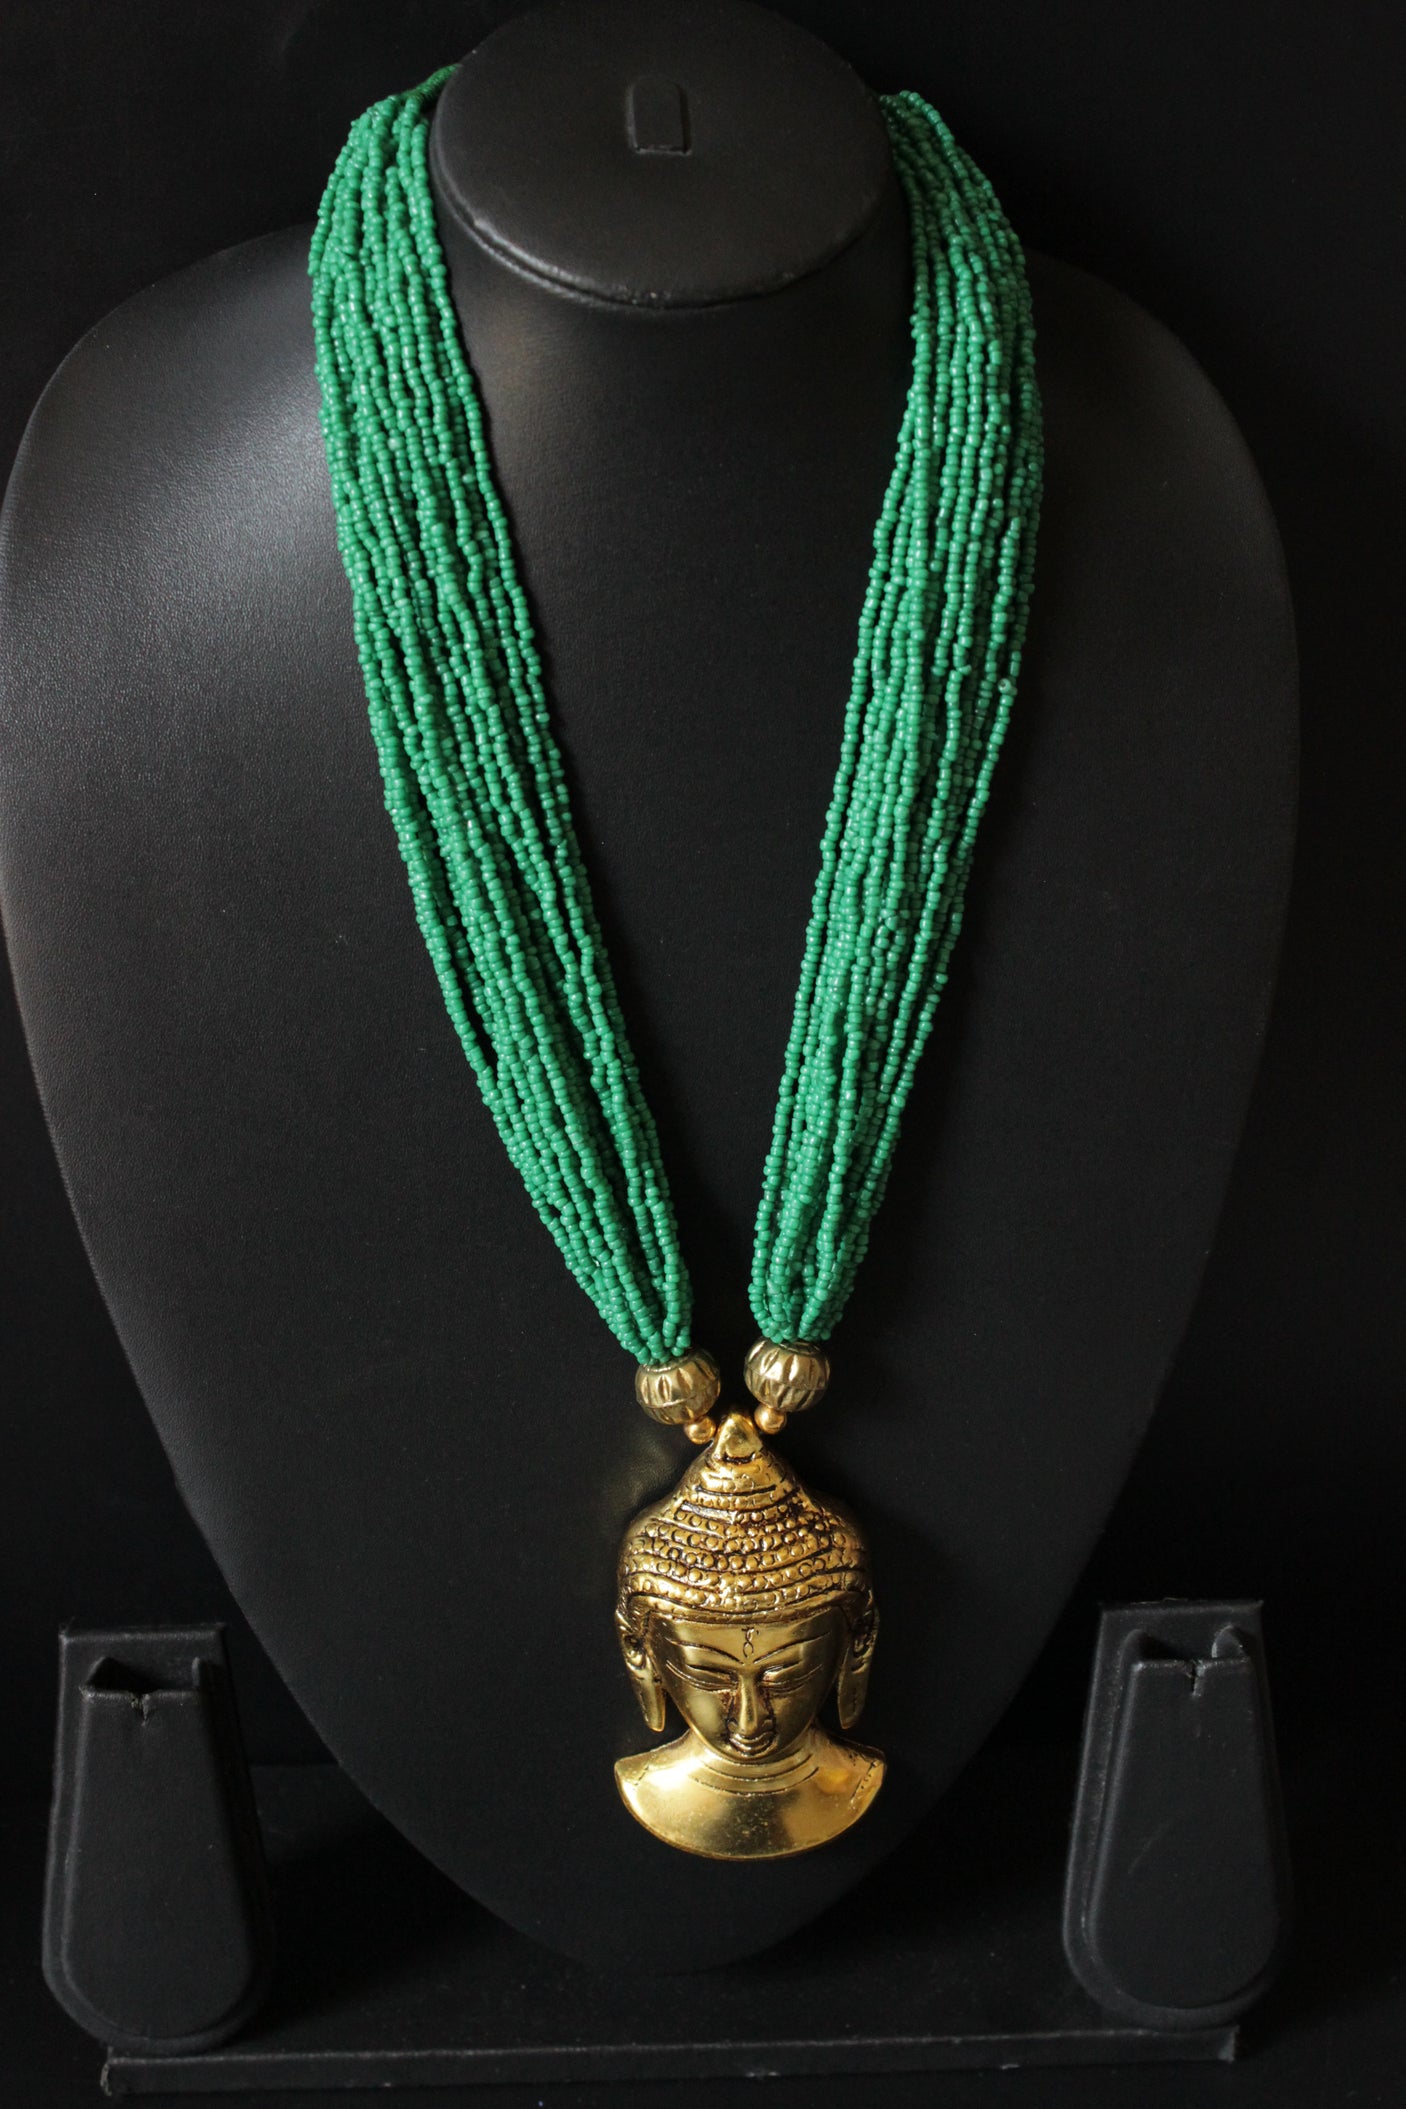 Green Beads Handcrafted Long Buddha Pendant Necklace